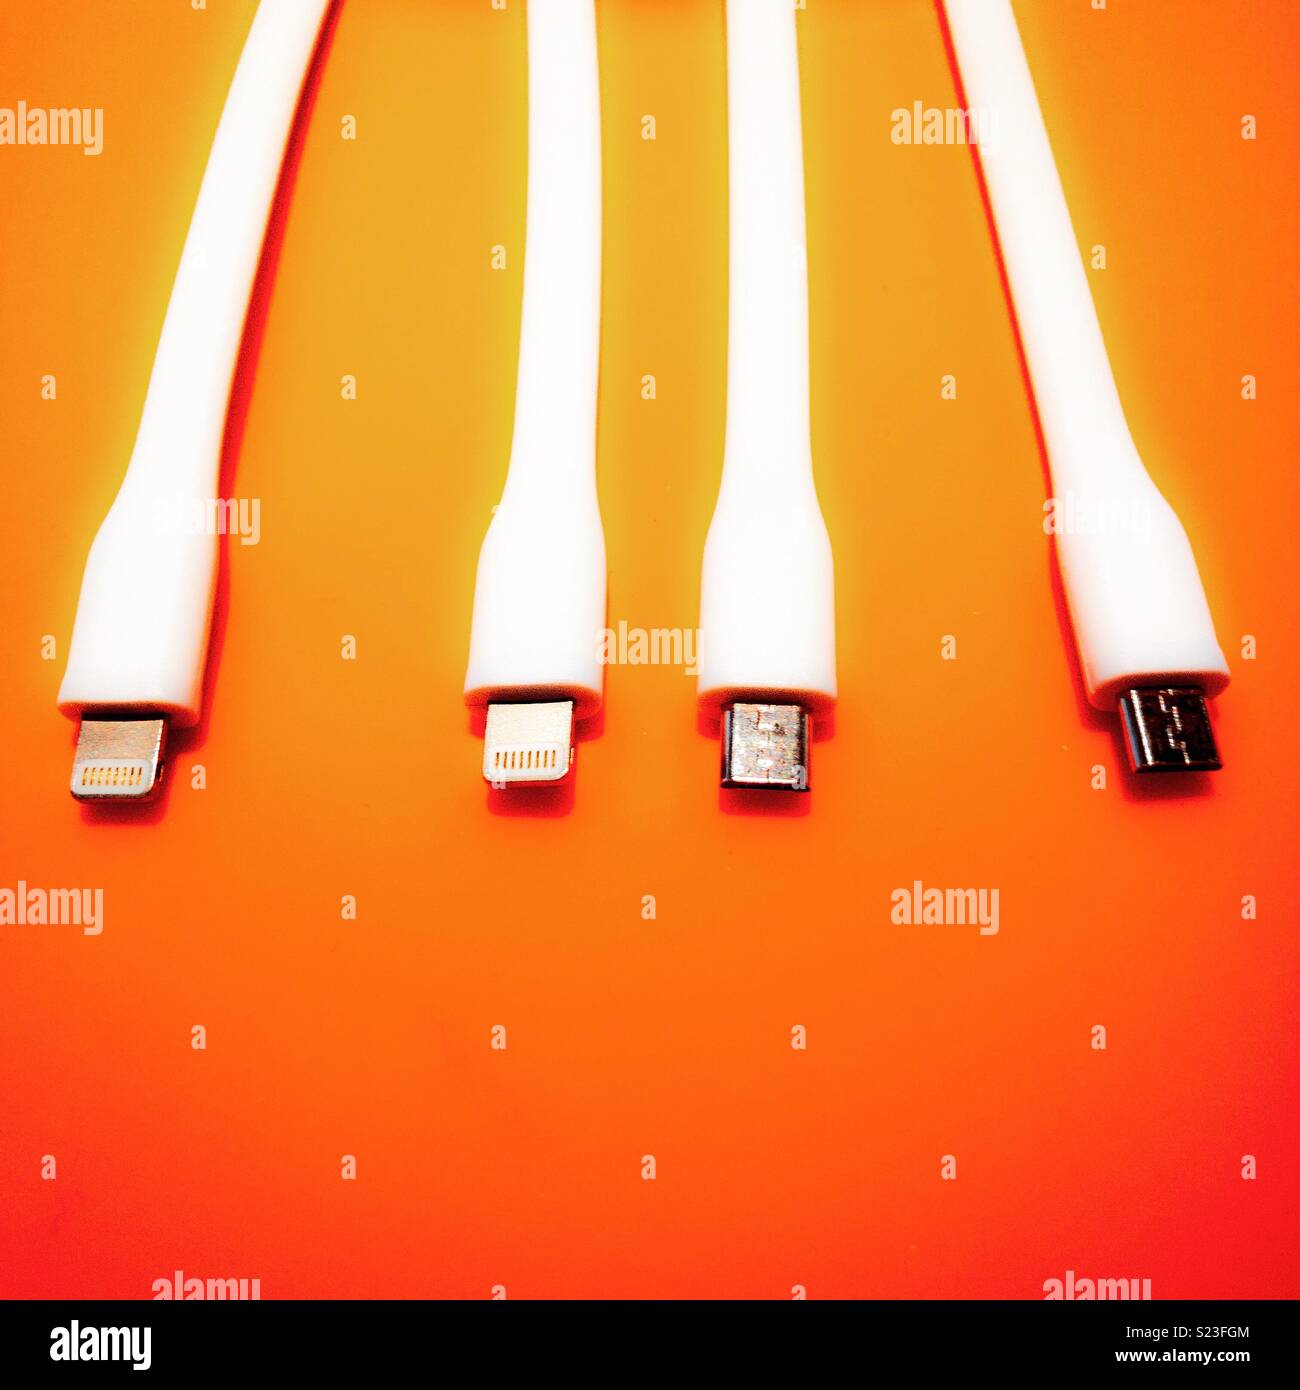 Phone charging cables on an orange mat Stock Photo